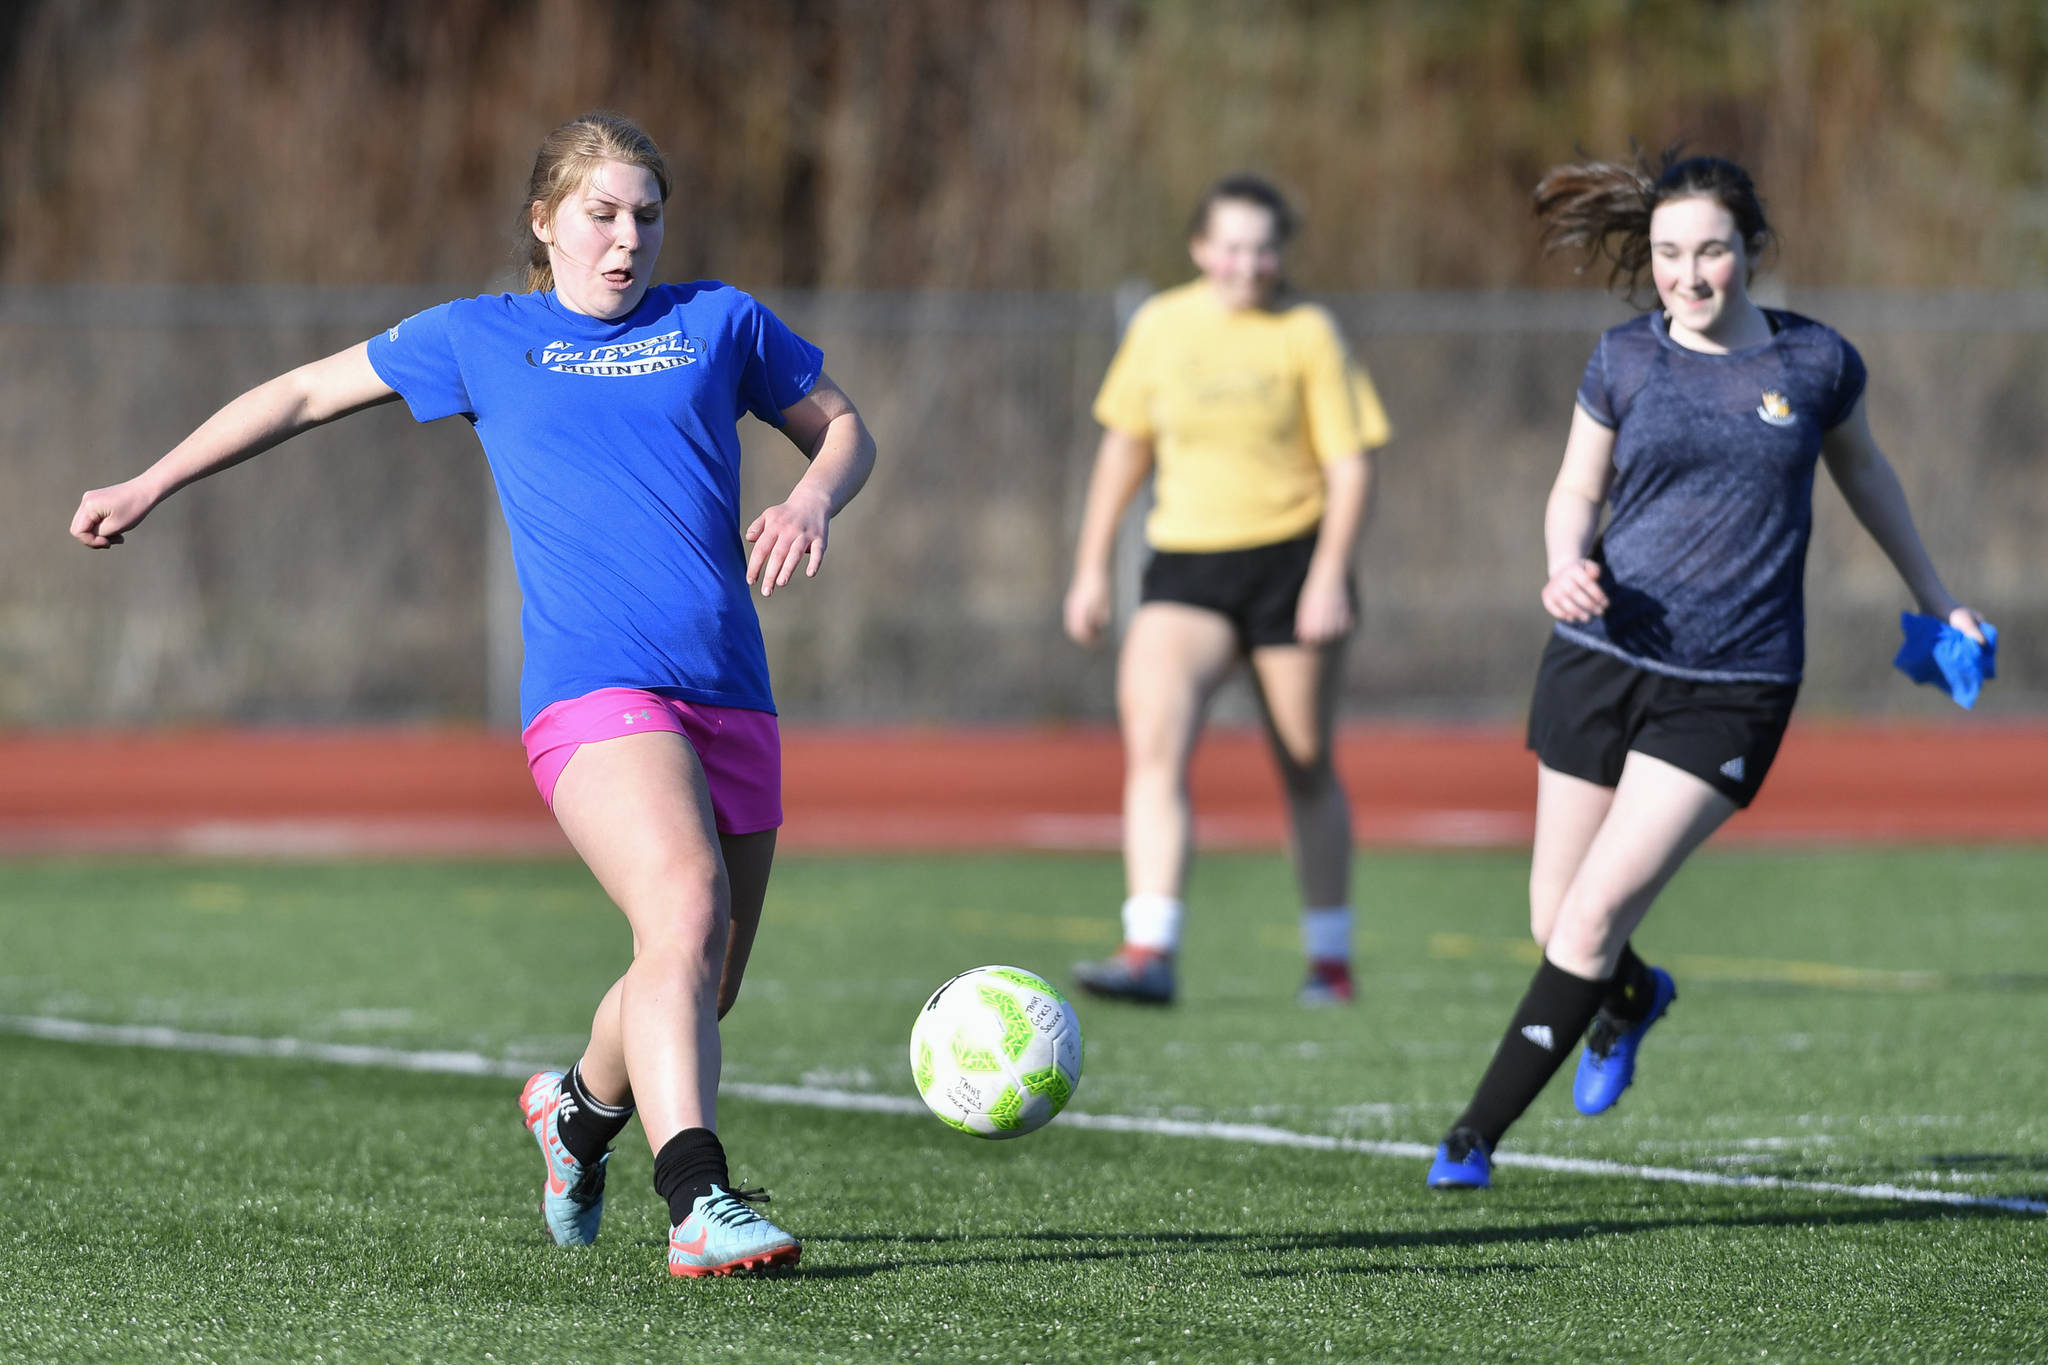 Sally Thompson, left, keeps the ball away from Alina Renz, right, during Thunder Mountain High School girls soccer practice on Friday, March 29, 2019. (Michael Penn | Juneau Empire)